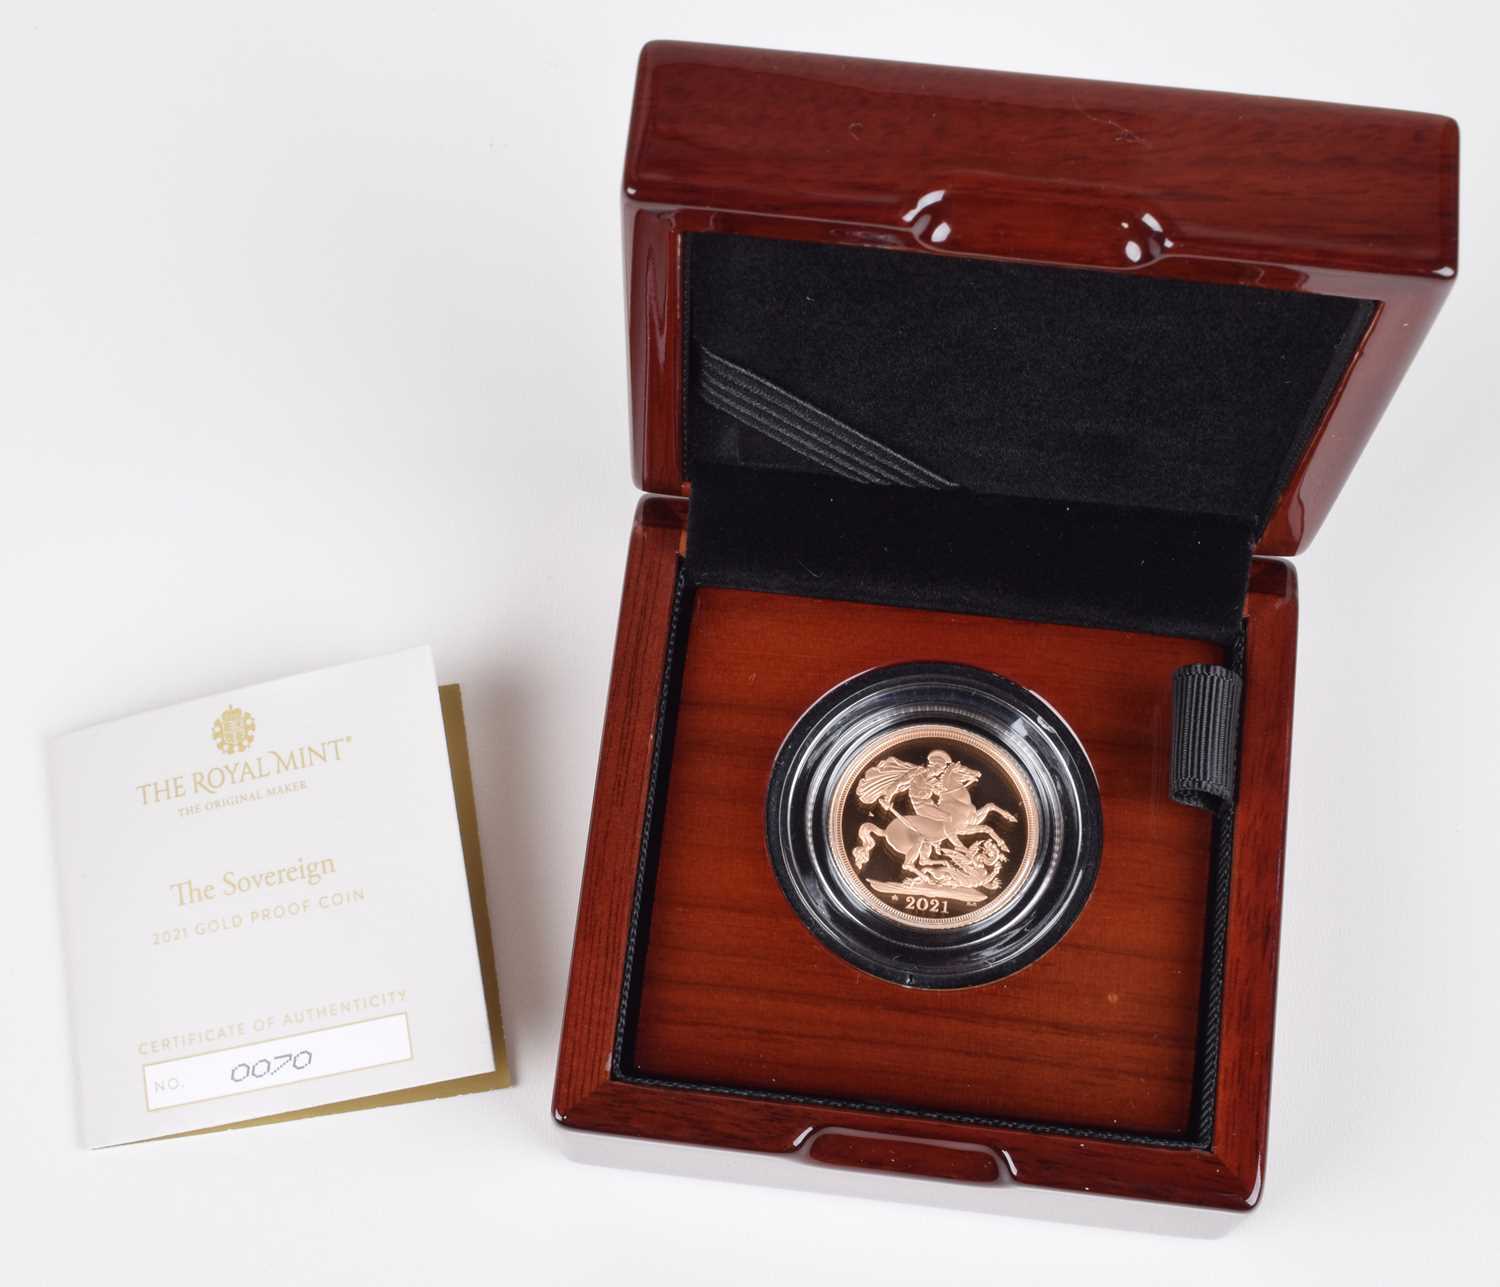 Lot Elizabeth II, Gold Proof Sovereign, 2020, with '95' crown privy mark on reverse.